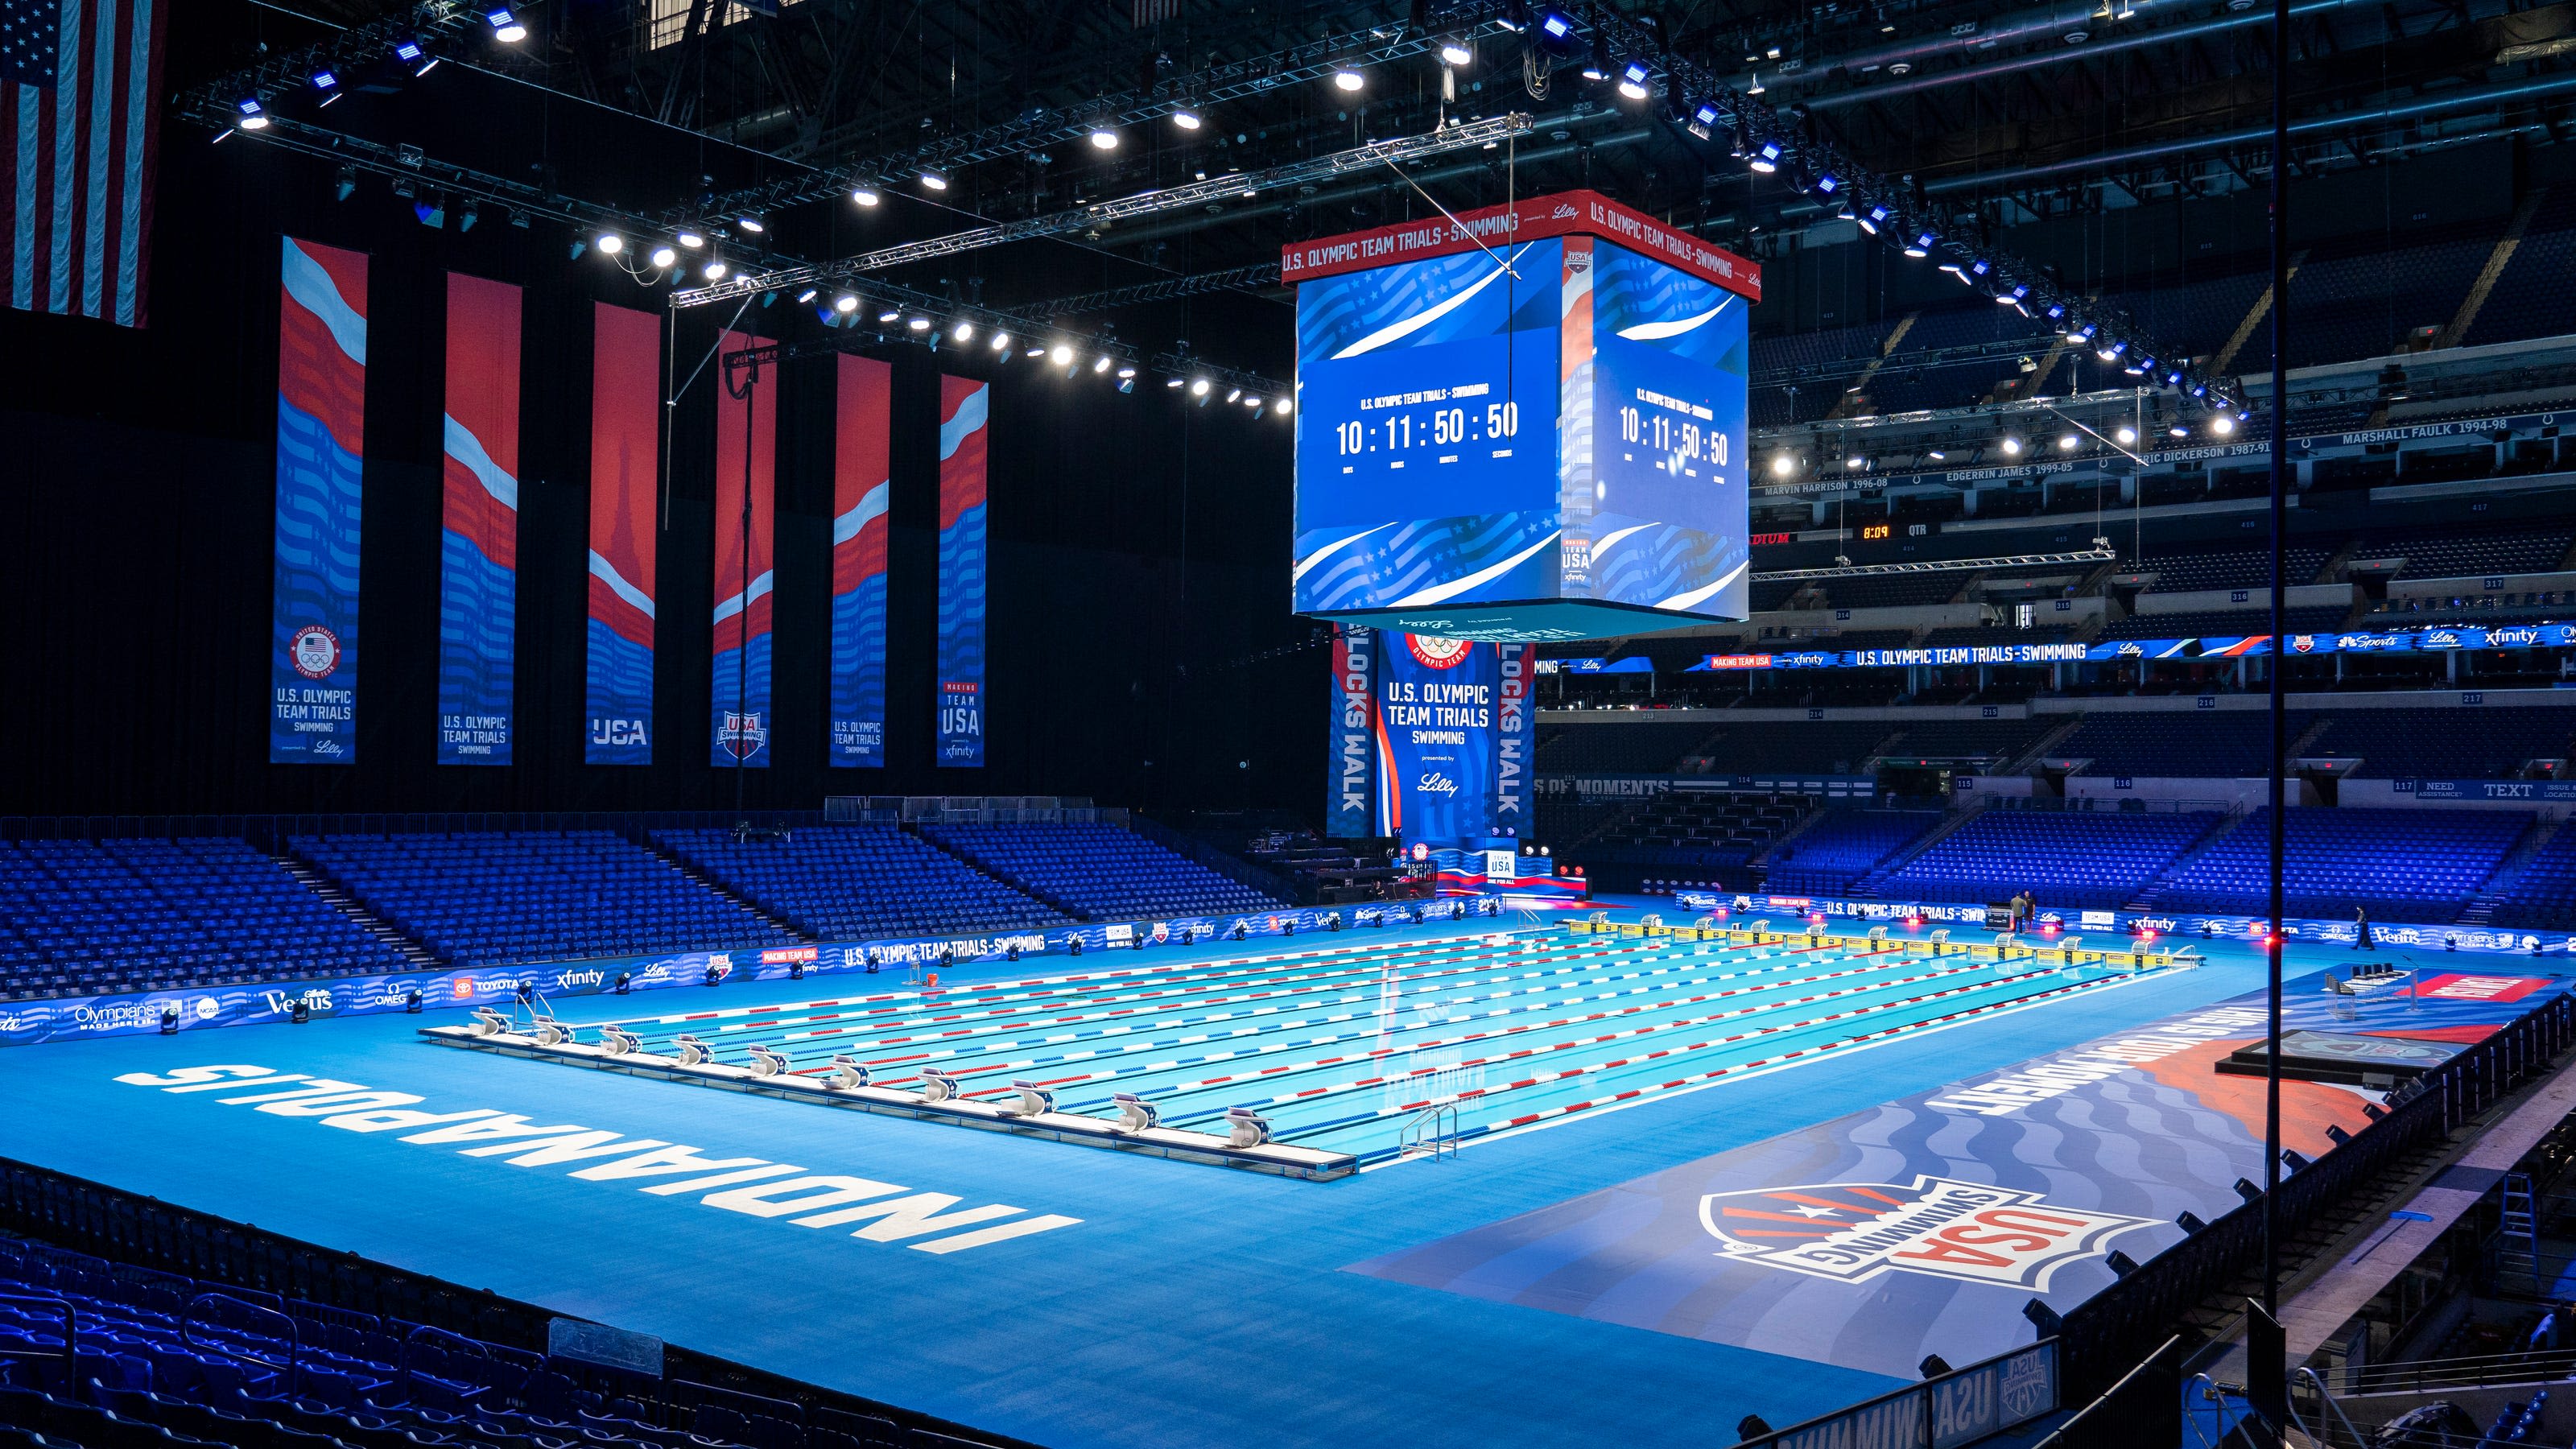 Take a look at the Olympic-sized swimming pool inside Lucas Oil Stadium